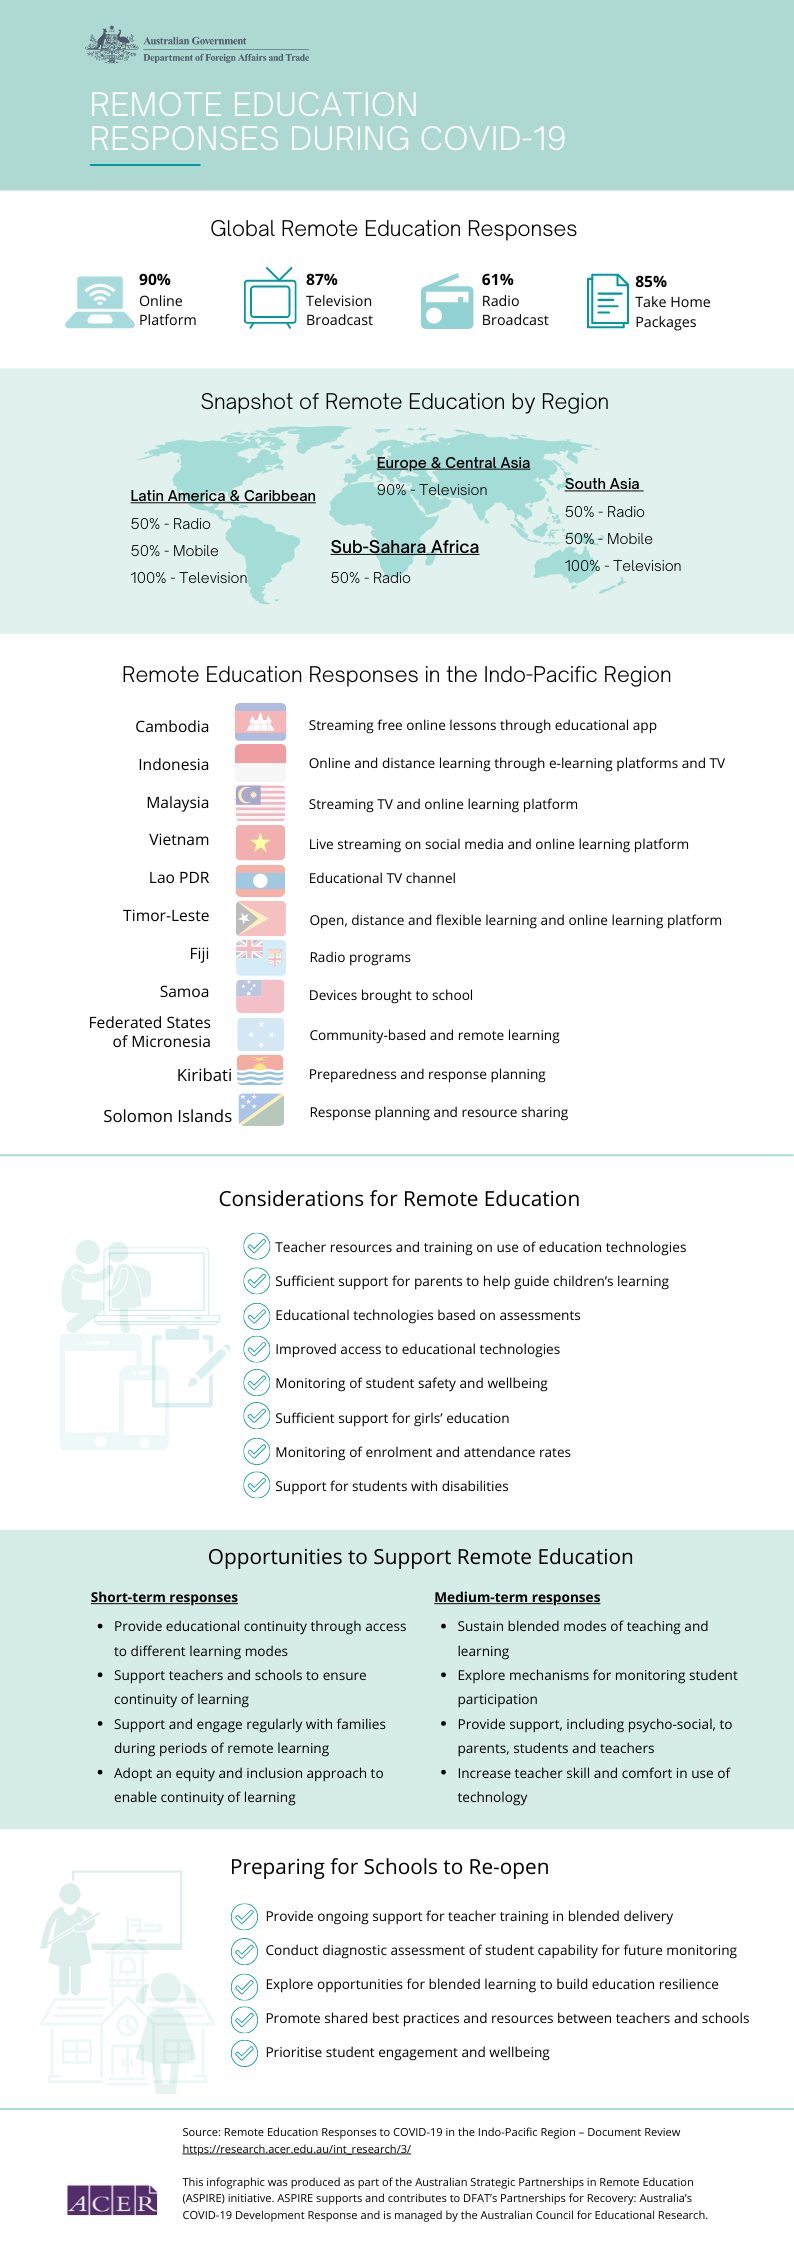 Remote education responses during COVID-19 infographic